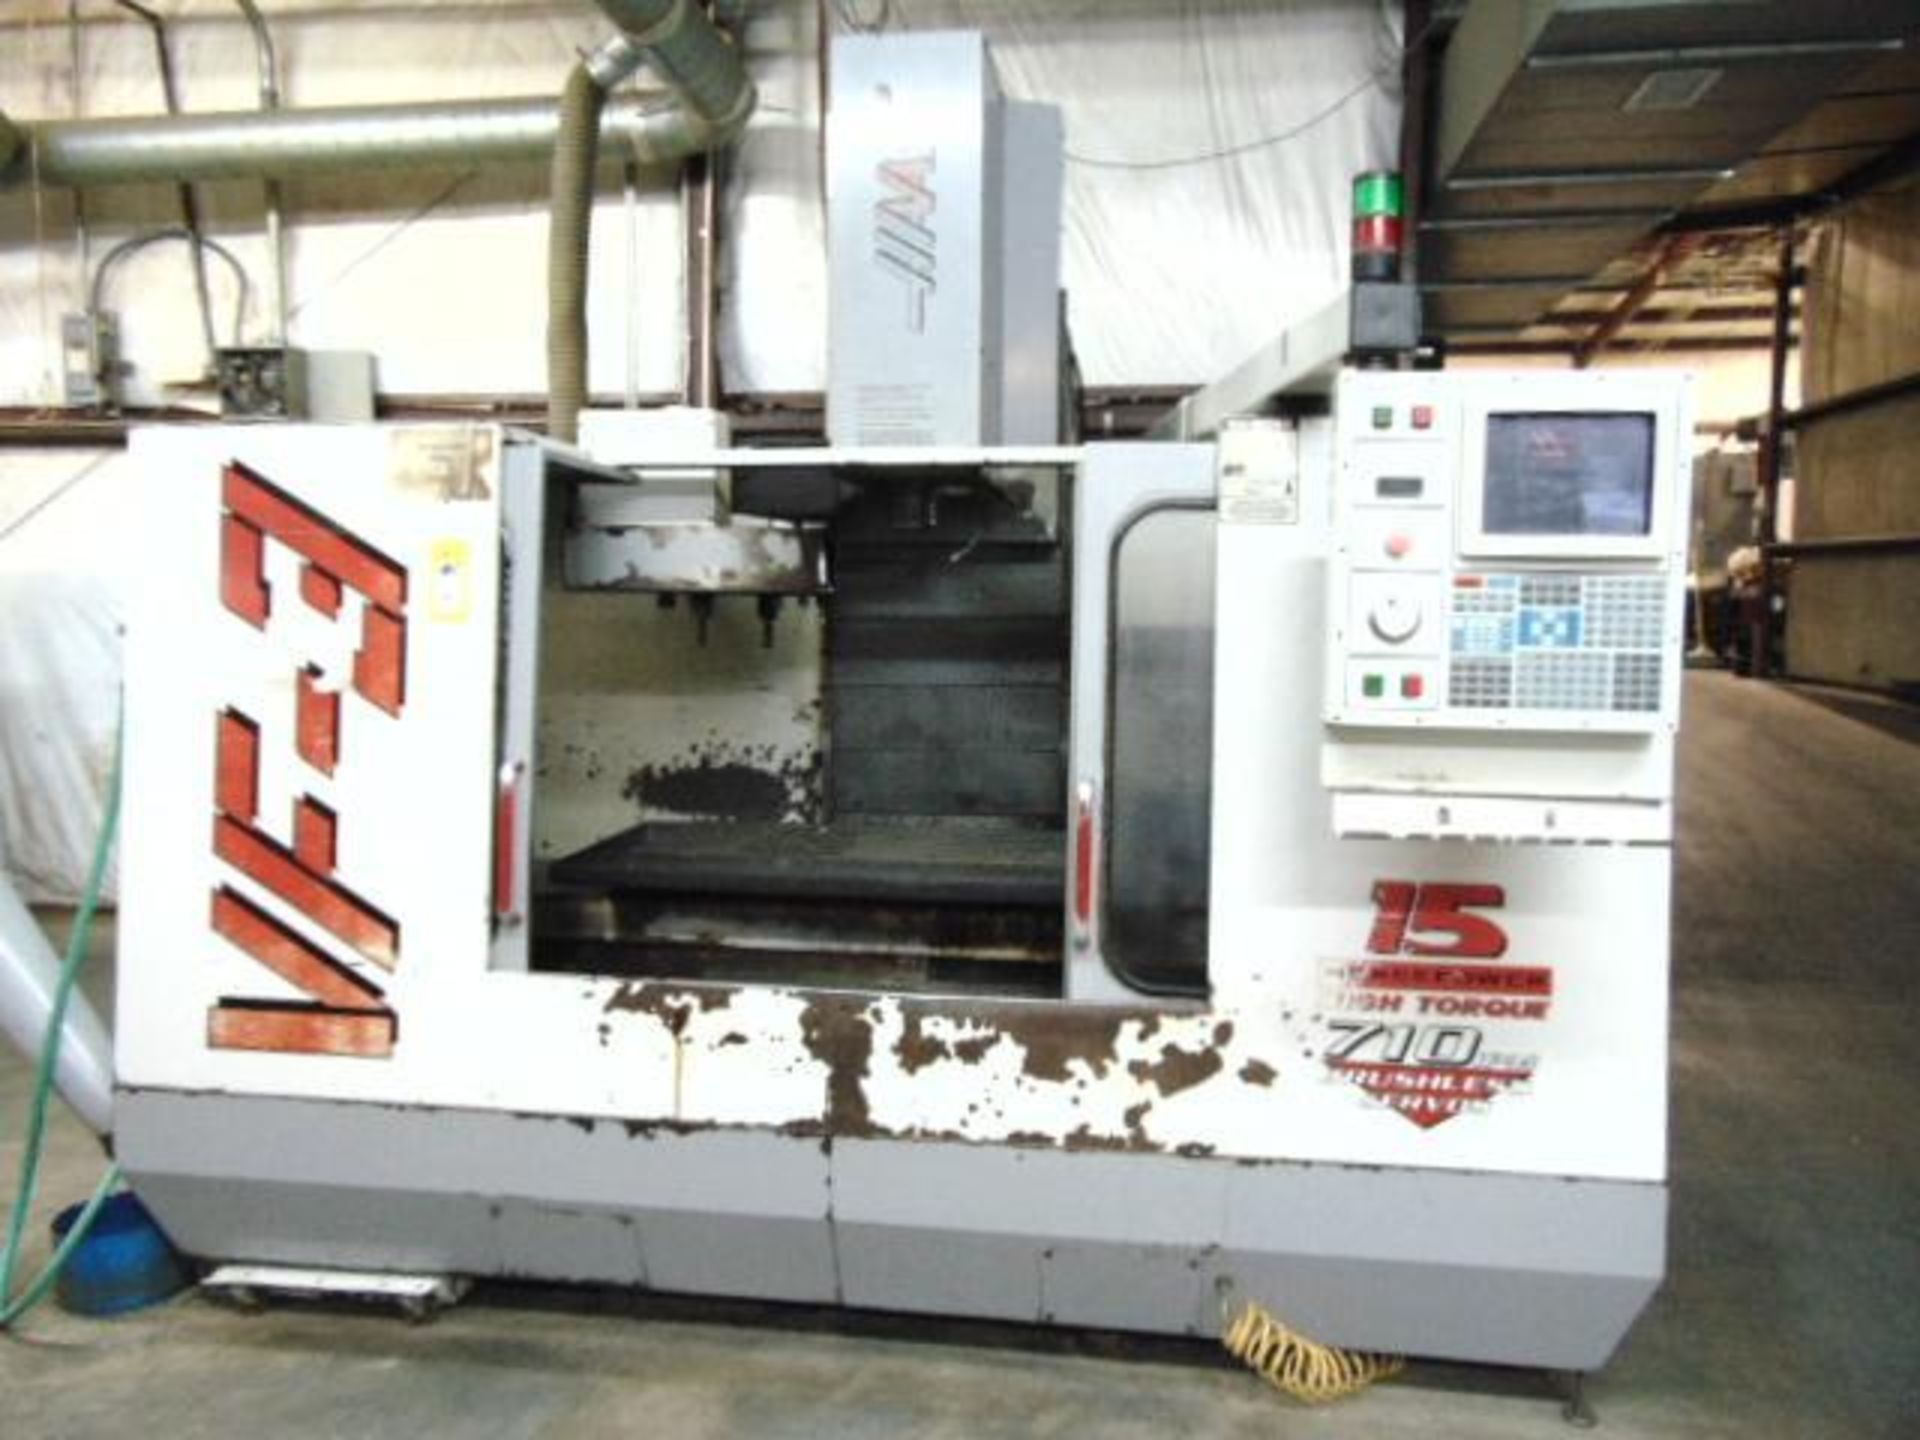 4-AXIS VERTICAL MACHINING CENTER, HAAS MDL. VF-3, new 1997, 48" x 18" tbl. size, 40" X, 20" Y, 25" Z